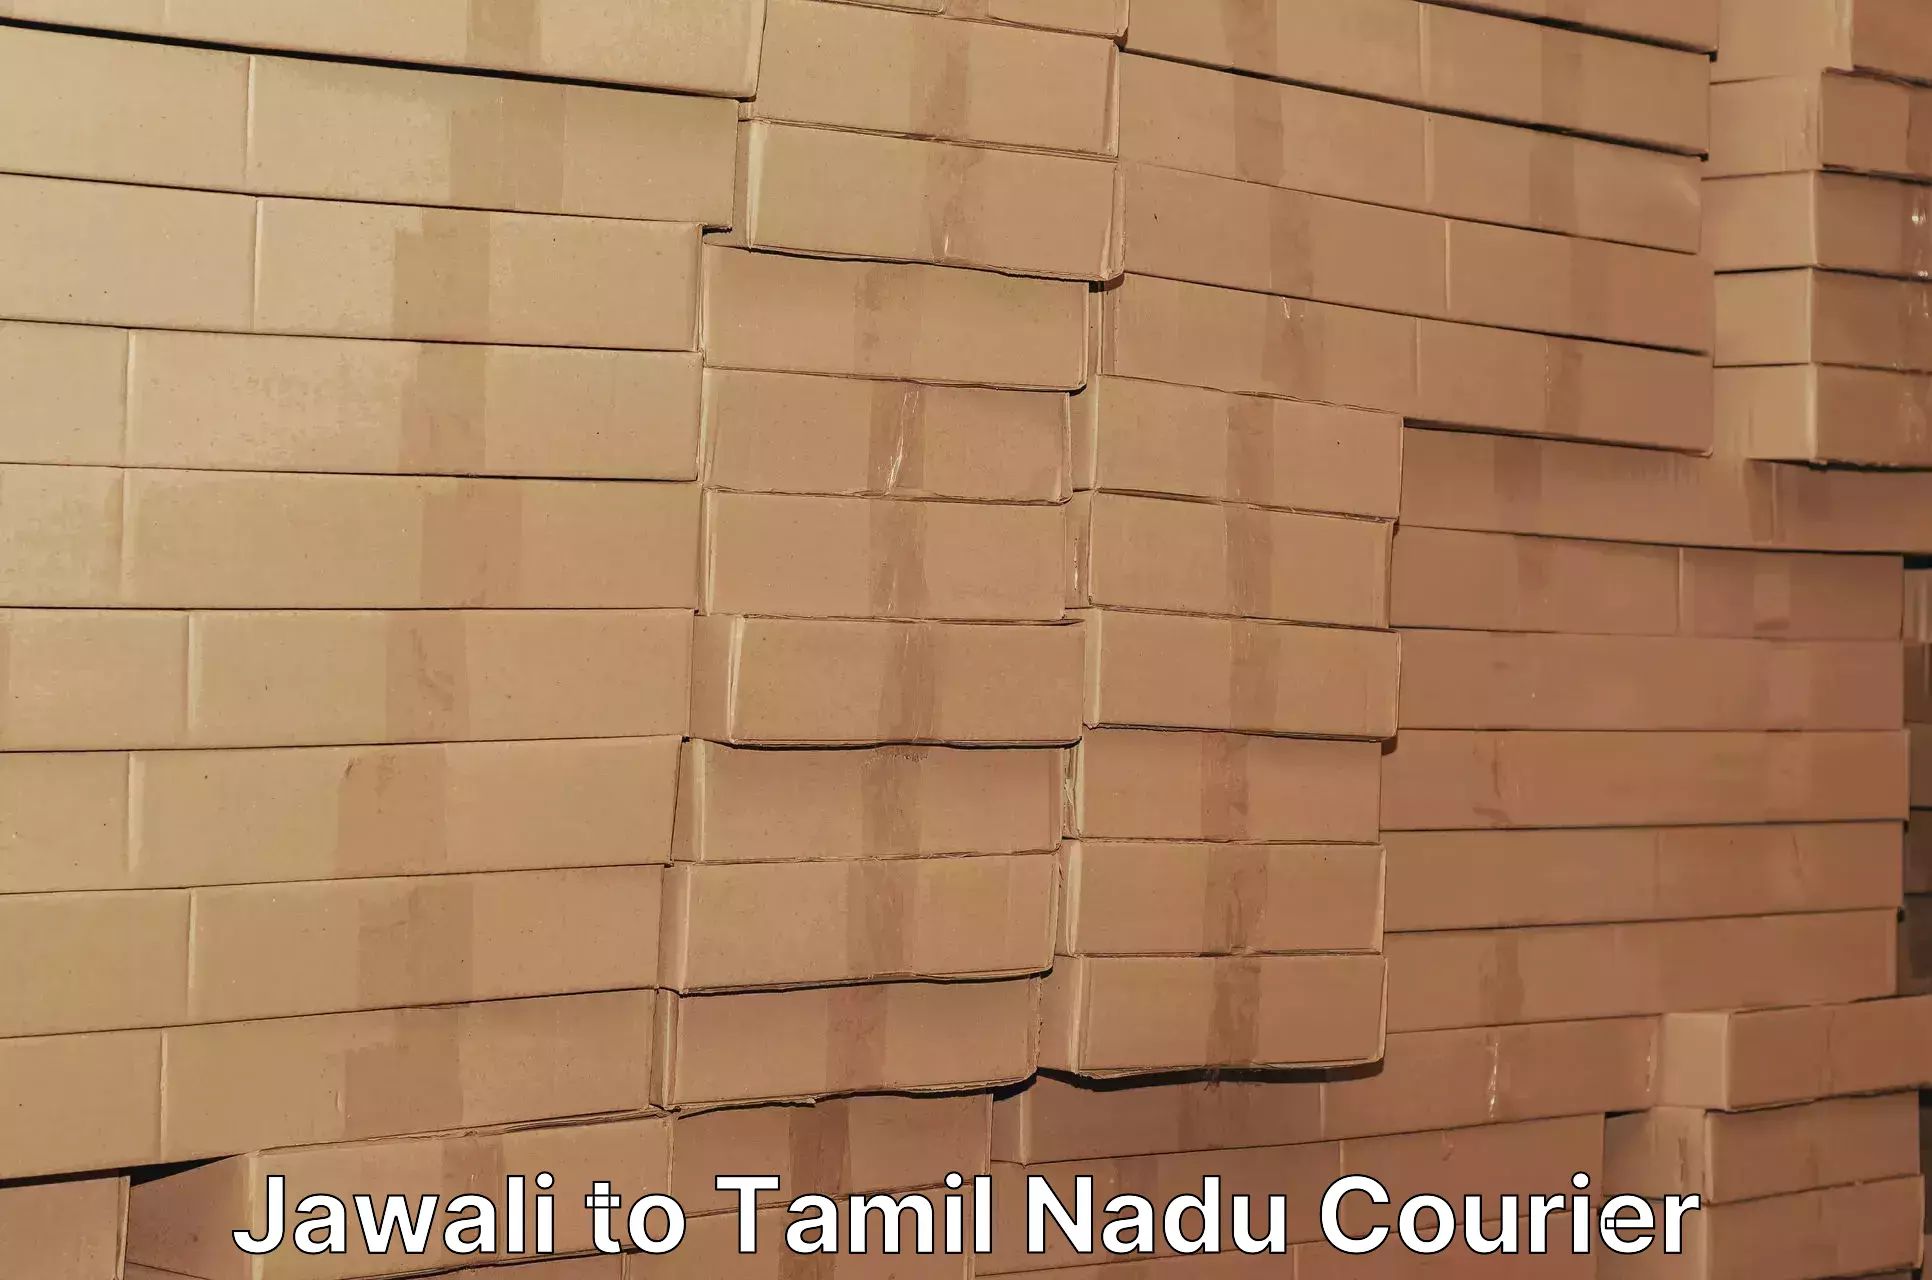 Courier service efficiency Jawali to Tuticorin Port